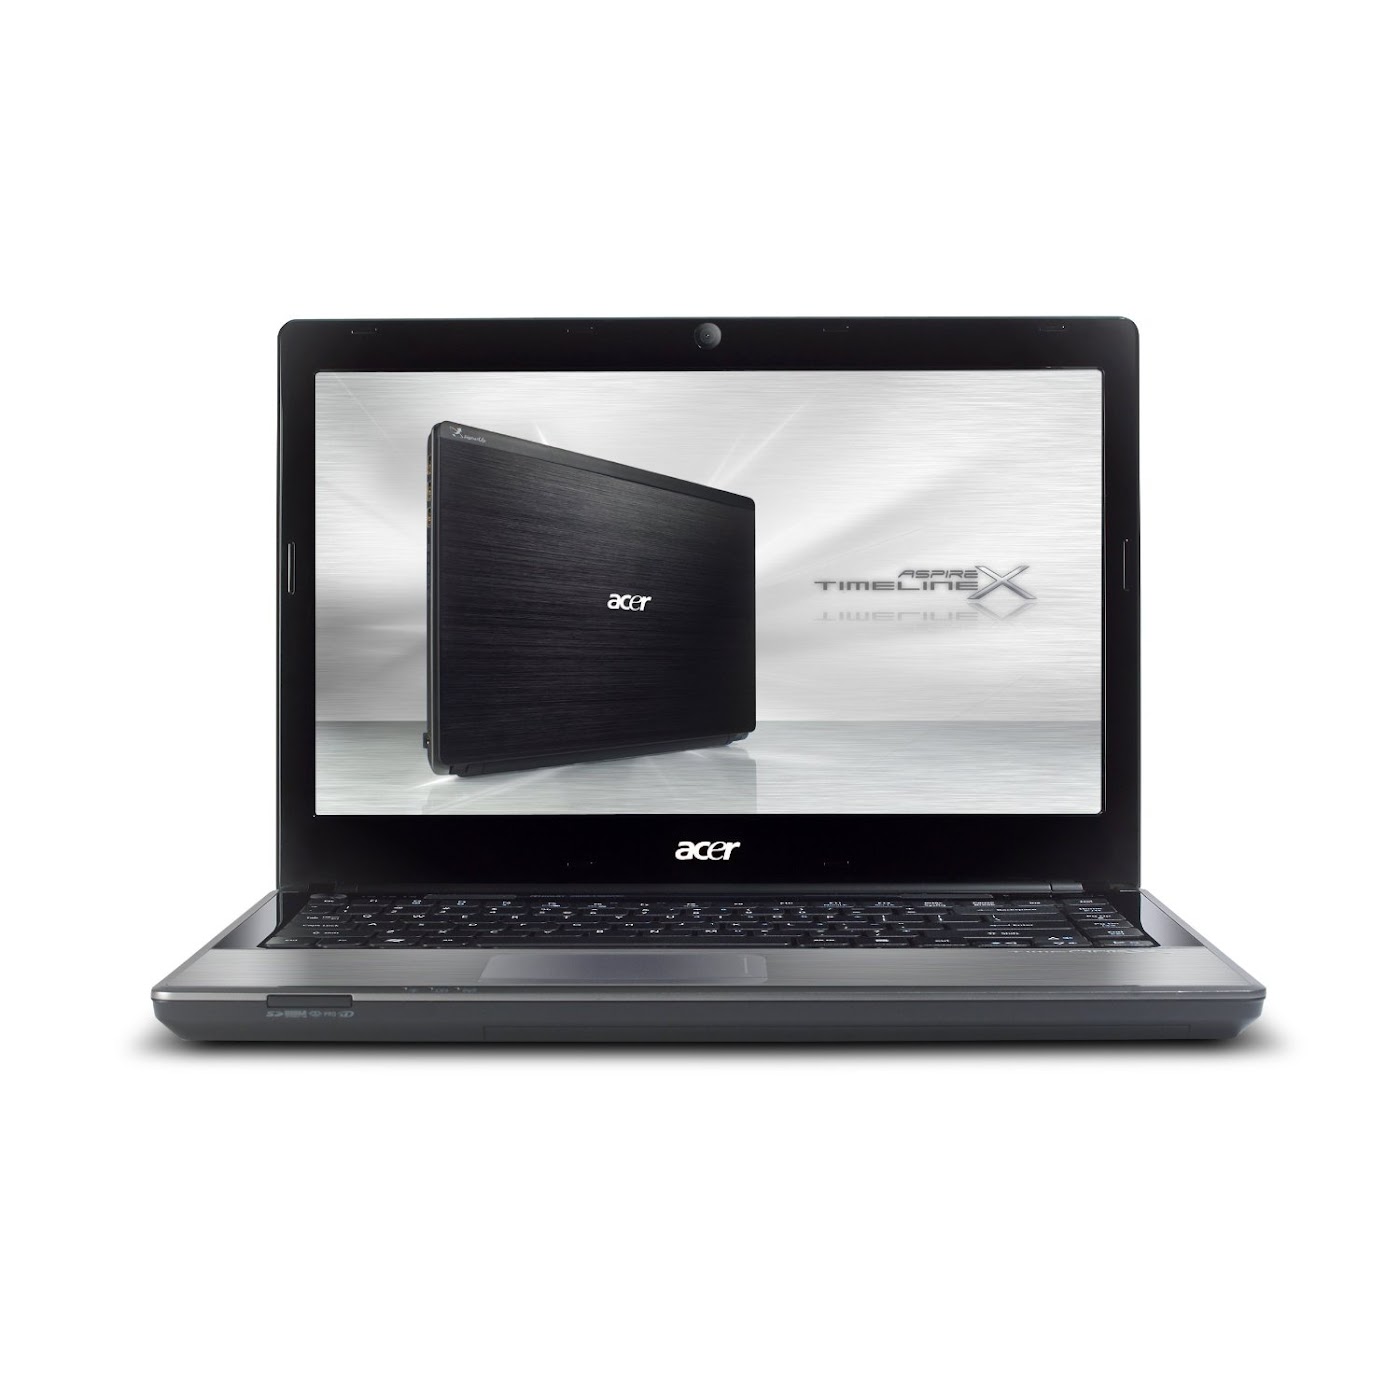 Acer Aspire TimelineX AS4820T-5570 SPECIFICATION